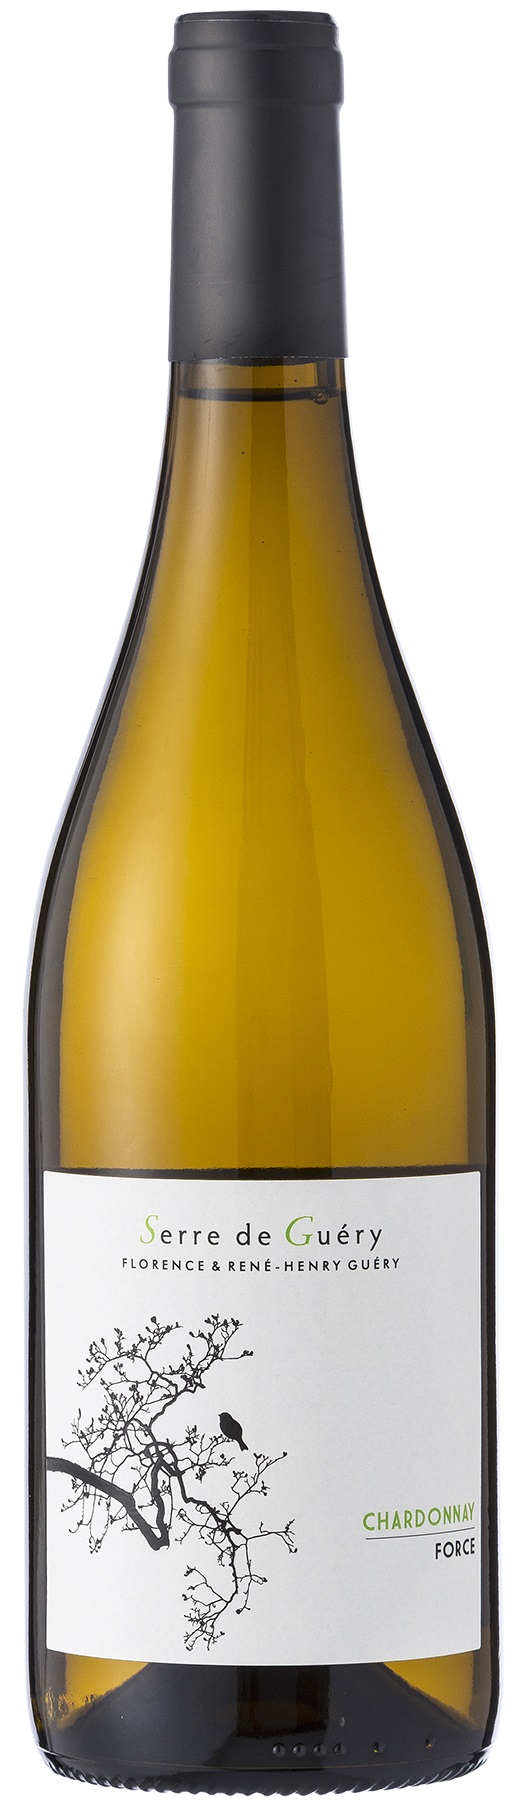 77544 Force Chardonnay Chateau Guery Pays d'Oc 0,75 liter